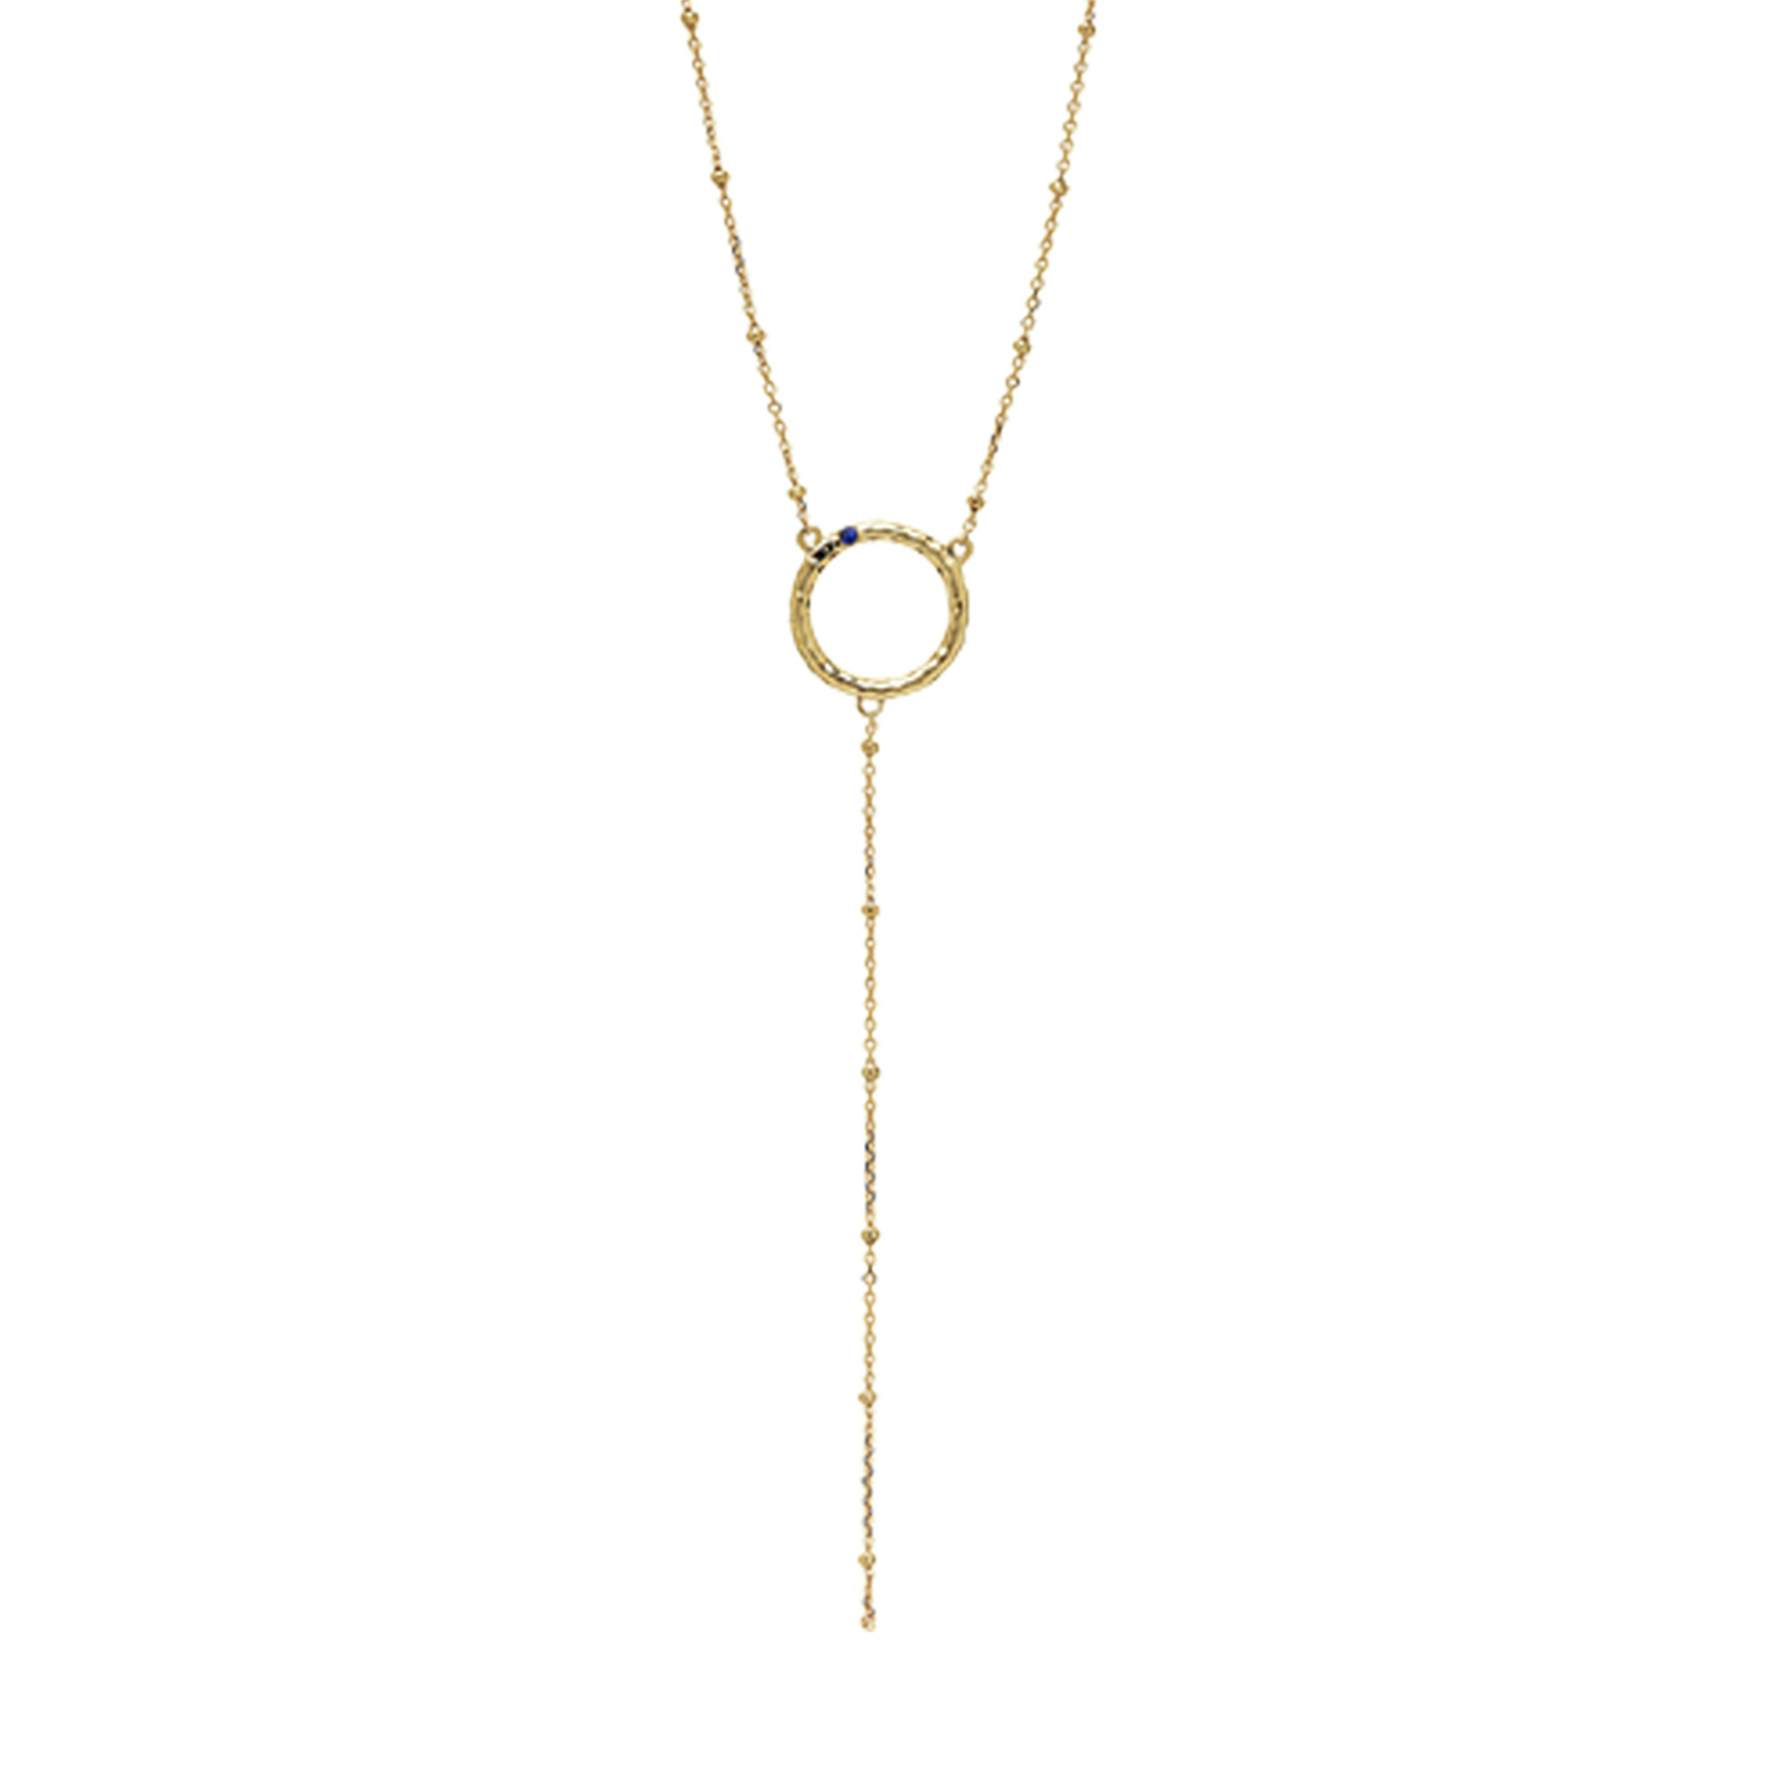 Anabel By Sistie Necklace from Sistie in Goldplated-Silver Sterling 925